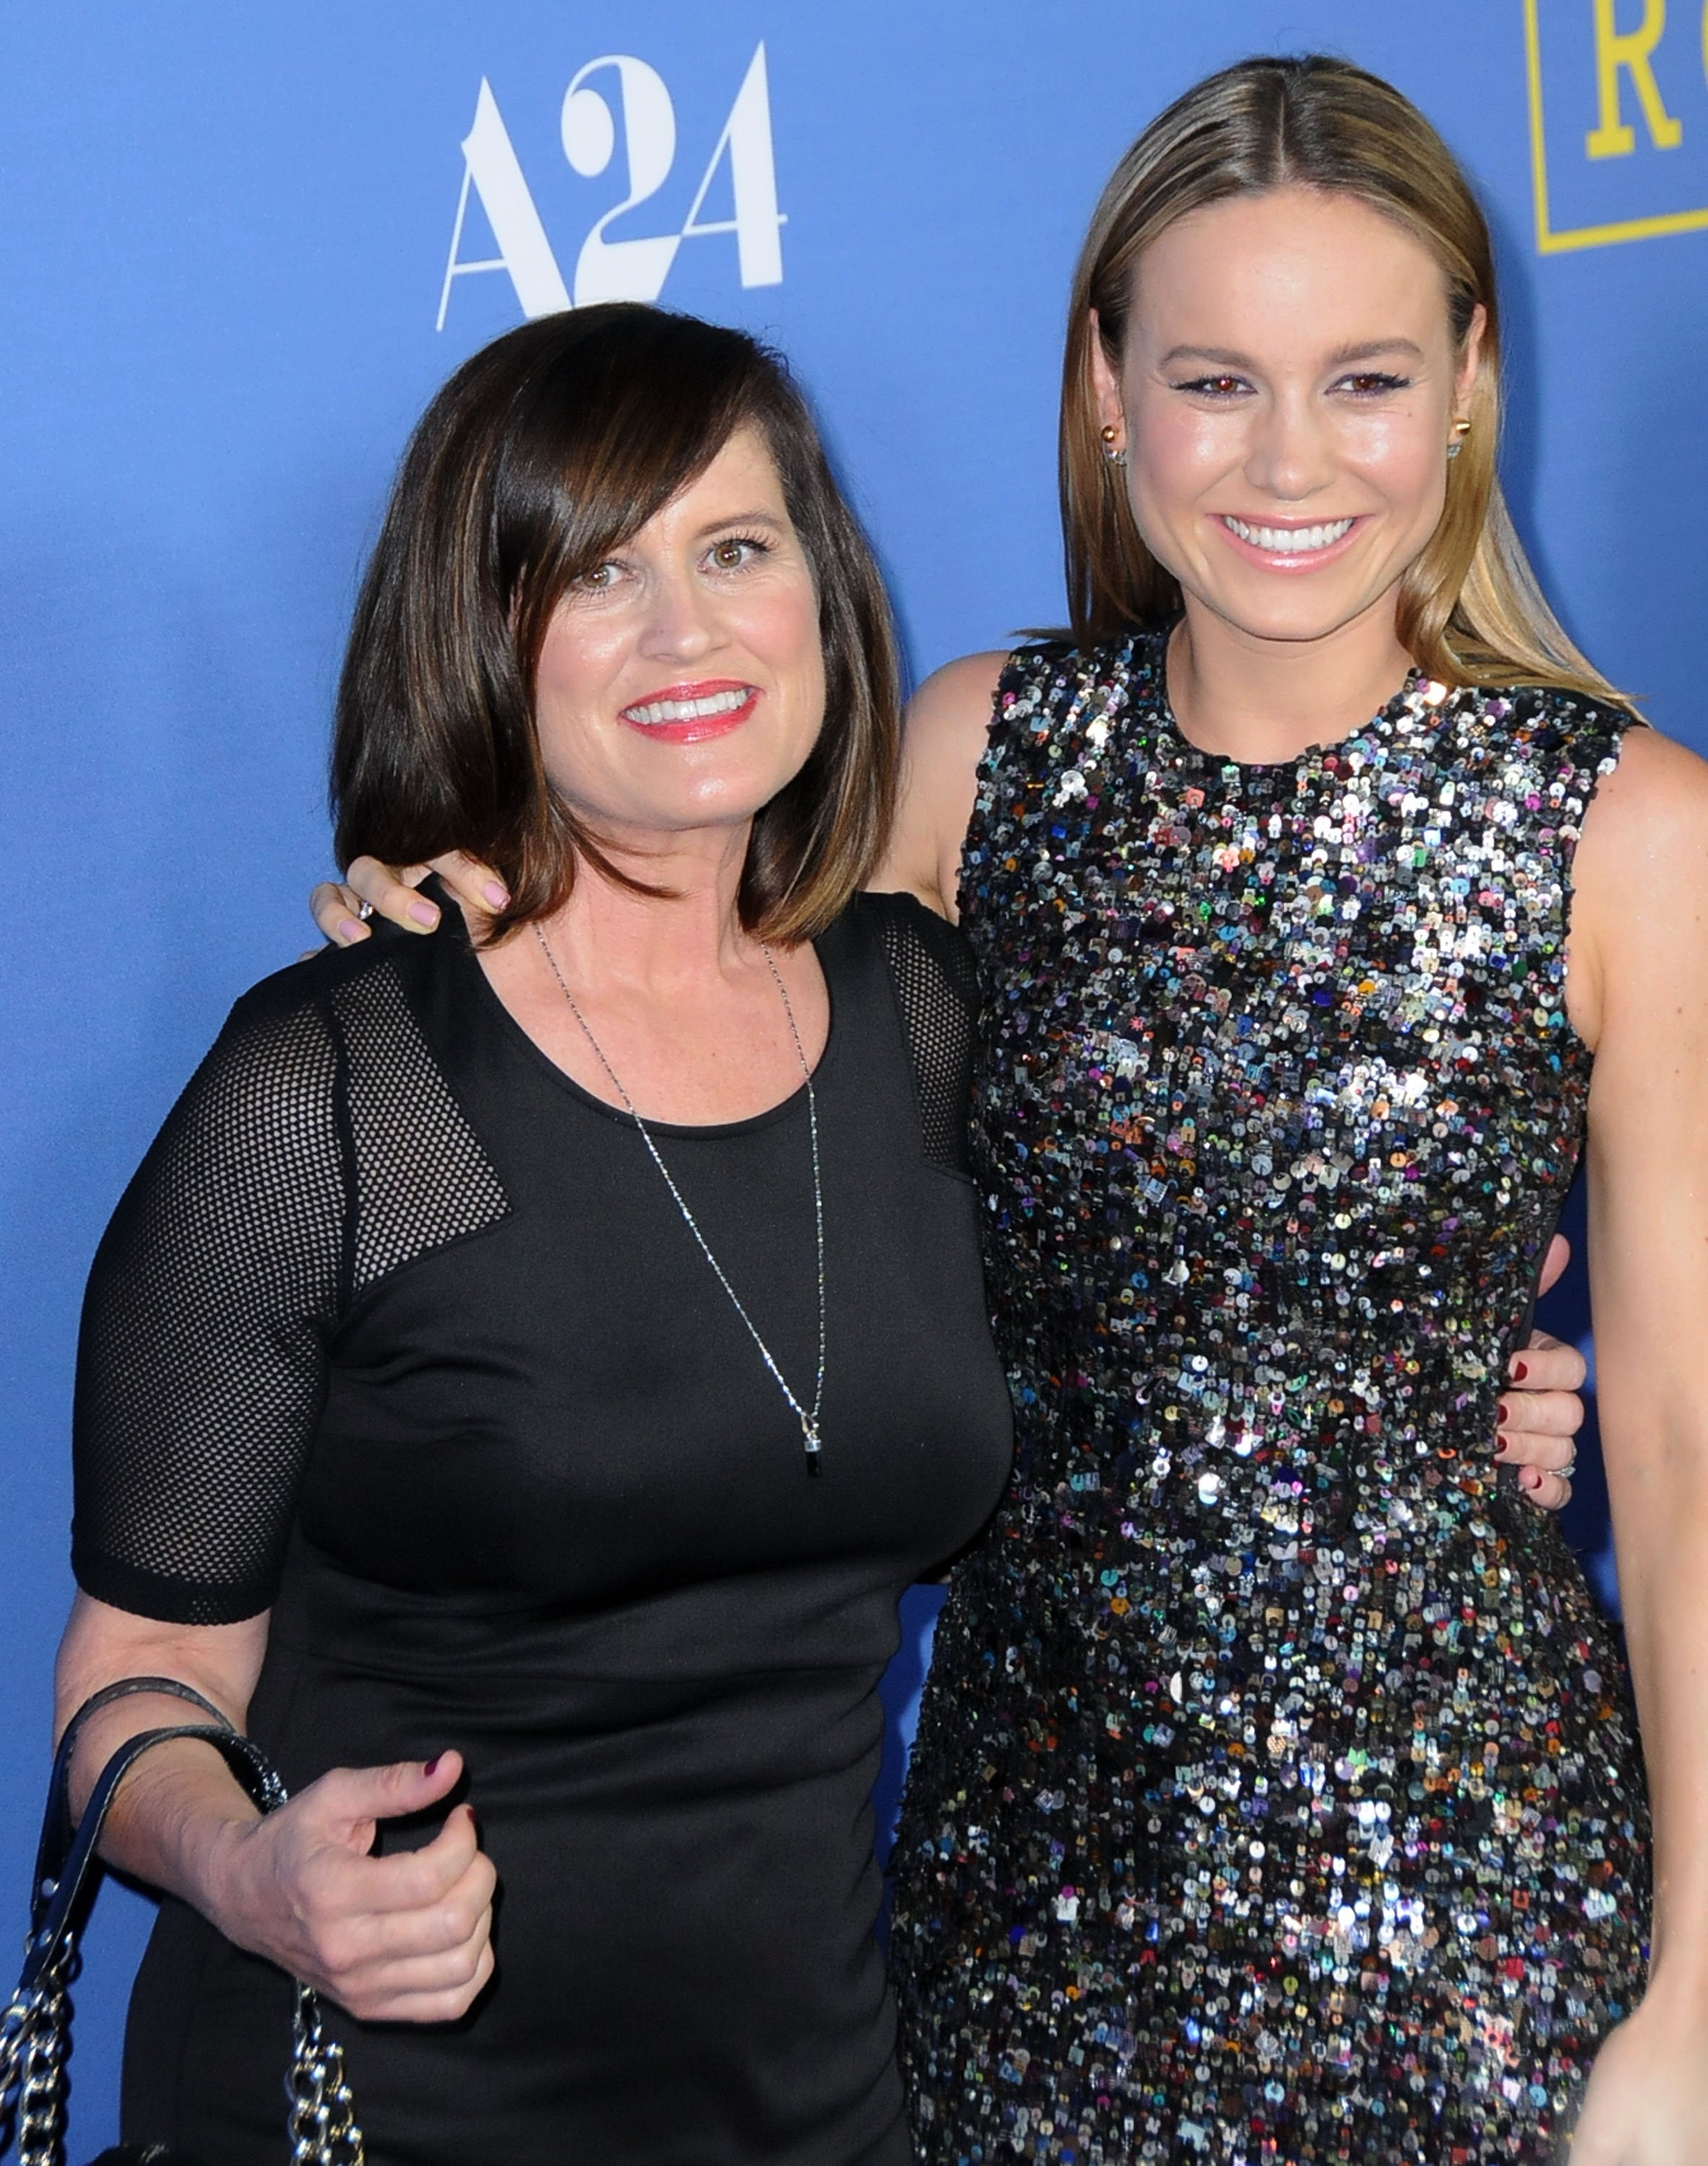 Brie Larson and her mother at the premiere of "Room" on October 13, 2015, in California. | Source: Getty Images